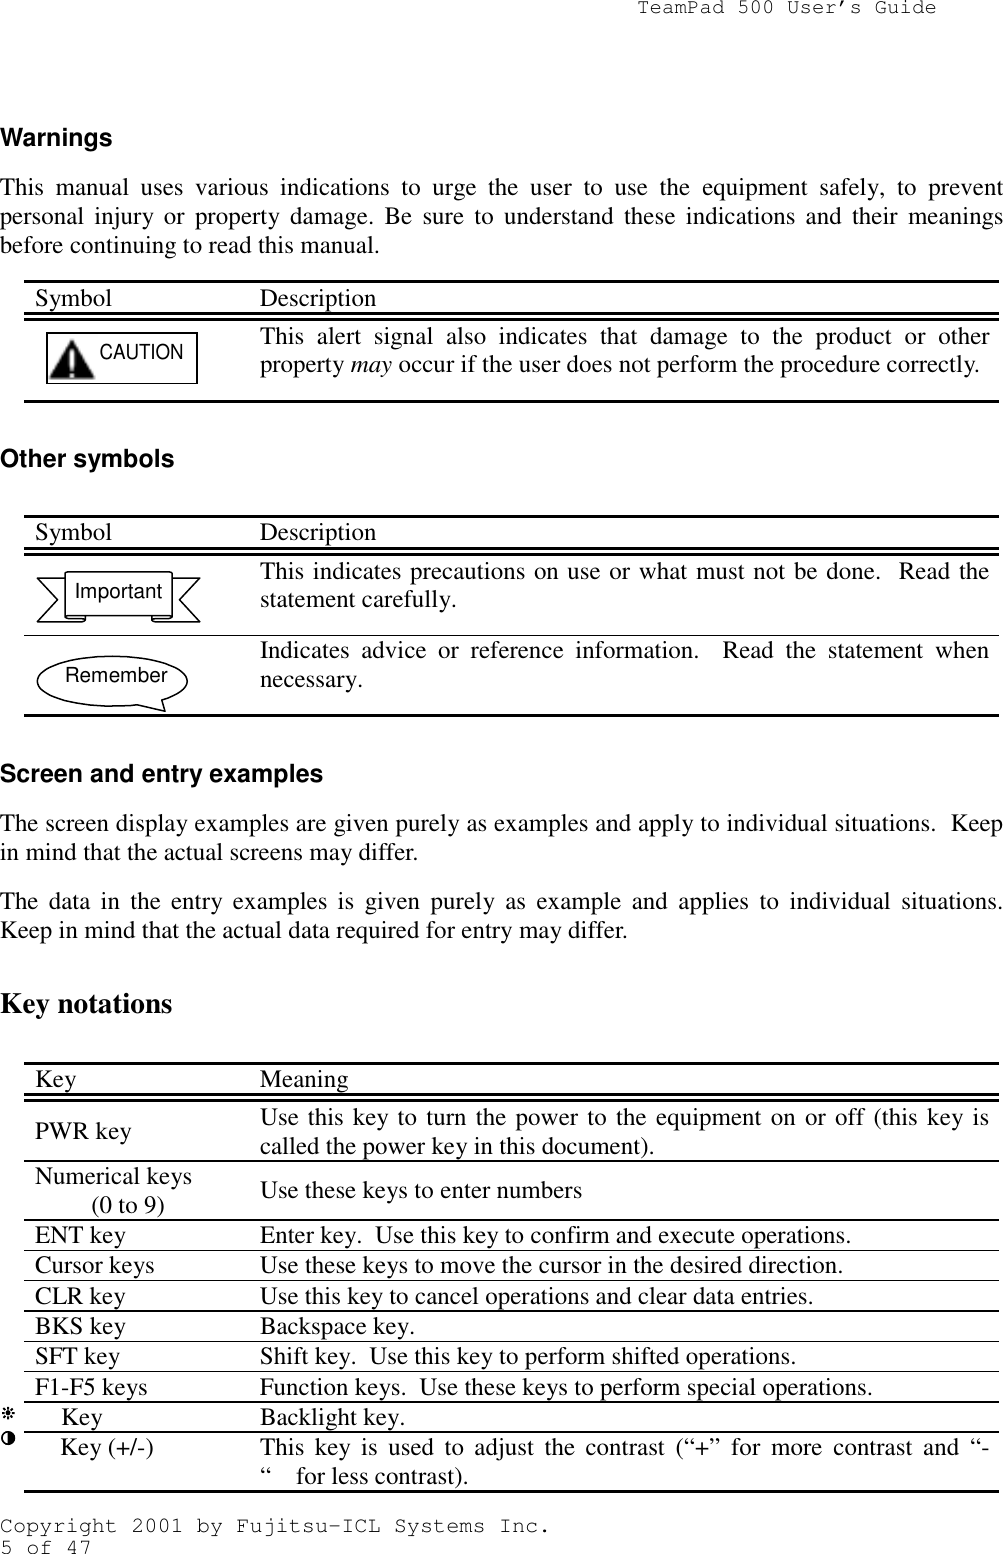                TeamPad 500 User’s GuideCopyright 2001 by Fujitsu-ICL Systems Inc.5 of 47WarningsThis manual uses various indications to urge the user to use the equipment safely, to preventpersonal injury or property damage. Be sure to understand these indications and their meaningsbefore continuing to read this manual.Symbol DescriptionThis alert signal also indicates that damage to the product or otherproperty may occur if the user does not perform the procedure correctly.Other symbolsSymbol DescriptionThis indicates precautions on use or what must not be done.  Read thestatement carefully.Indicates advice or reference information.  Read the statement whennecessary.Screen and entry examplesThe screen display examples are given purely as examples and apply to individual situations.  Keepin mind that the actual screens may differ.The data in the entry examples is given purely as example and applies to individual situations.Keep in mind that the actual data required for entry may differ.Key notationsKey MeaningPWR key Use this key to turn the power to the equipment on or off (this key iscalled the power key in this document).Numerical keys         (0 to 9) Use these keys to enter numbersENT key Enter key.  Use this key to confirm and execute operations.Cursor keys Use these keys to move the cursor in the desired direction.CLR key Use this key to cancel operations and clear data entries.BKS key Backspace key.SFT key Shift key.  Use this key to perform shifted operations.F1-F5 keys Function keys.  Use these keys to perform special operations.  Key Backlight key.    Key (+/-) This key is used to adjust the contrast (“+” for more contrast and “-“　for less contrast).CAUTIONImportantRemember